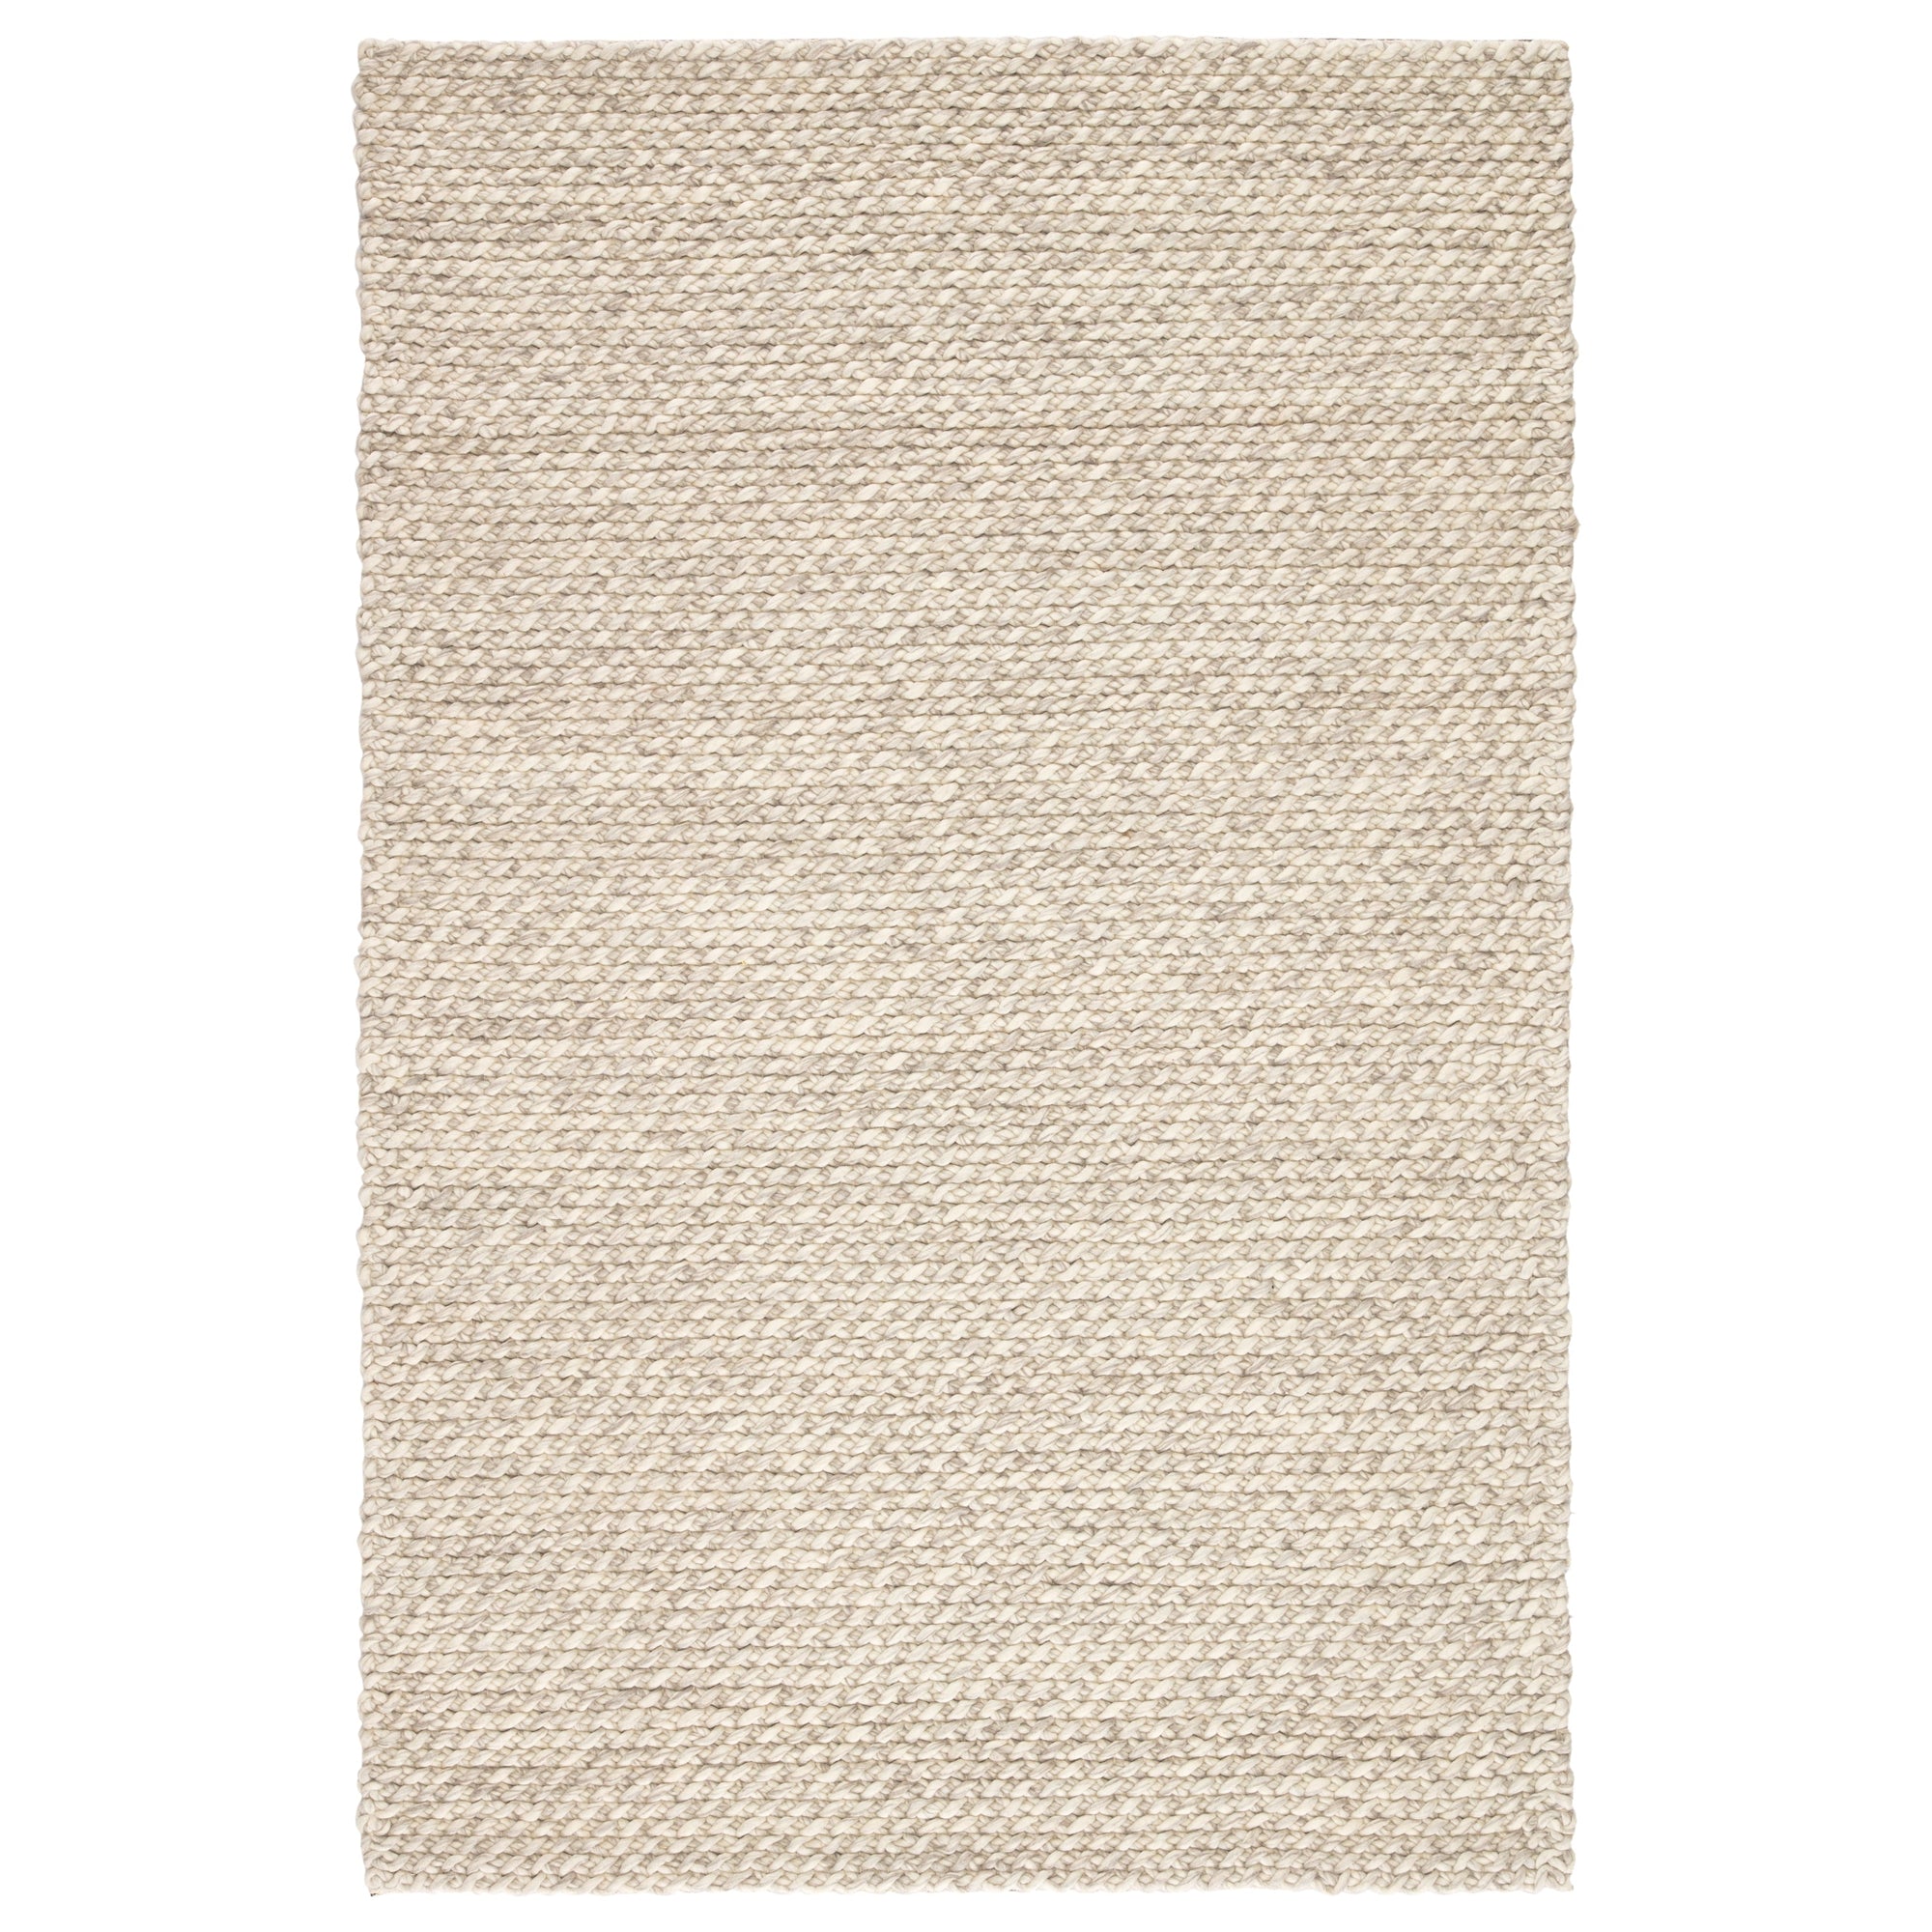 Rugs by Roo | Jaipur Living Alta Handmade Solid Gray White Area Rug-RUG108312